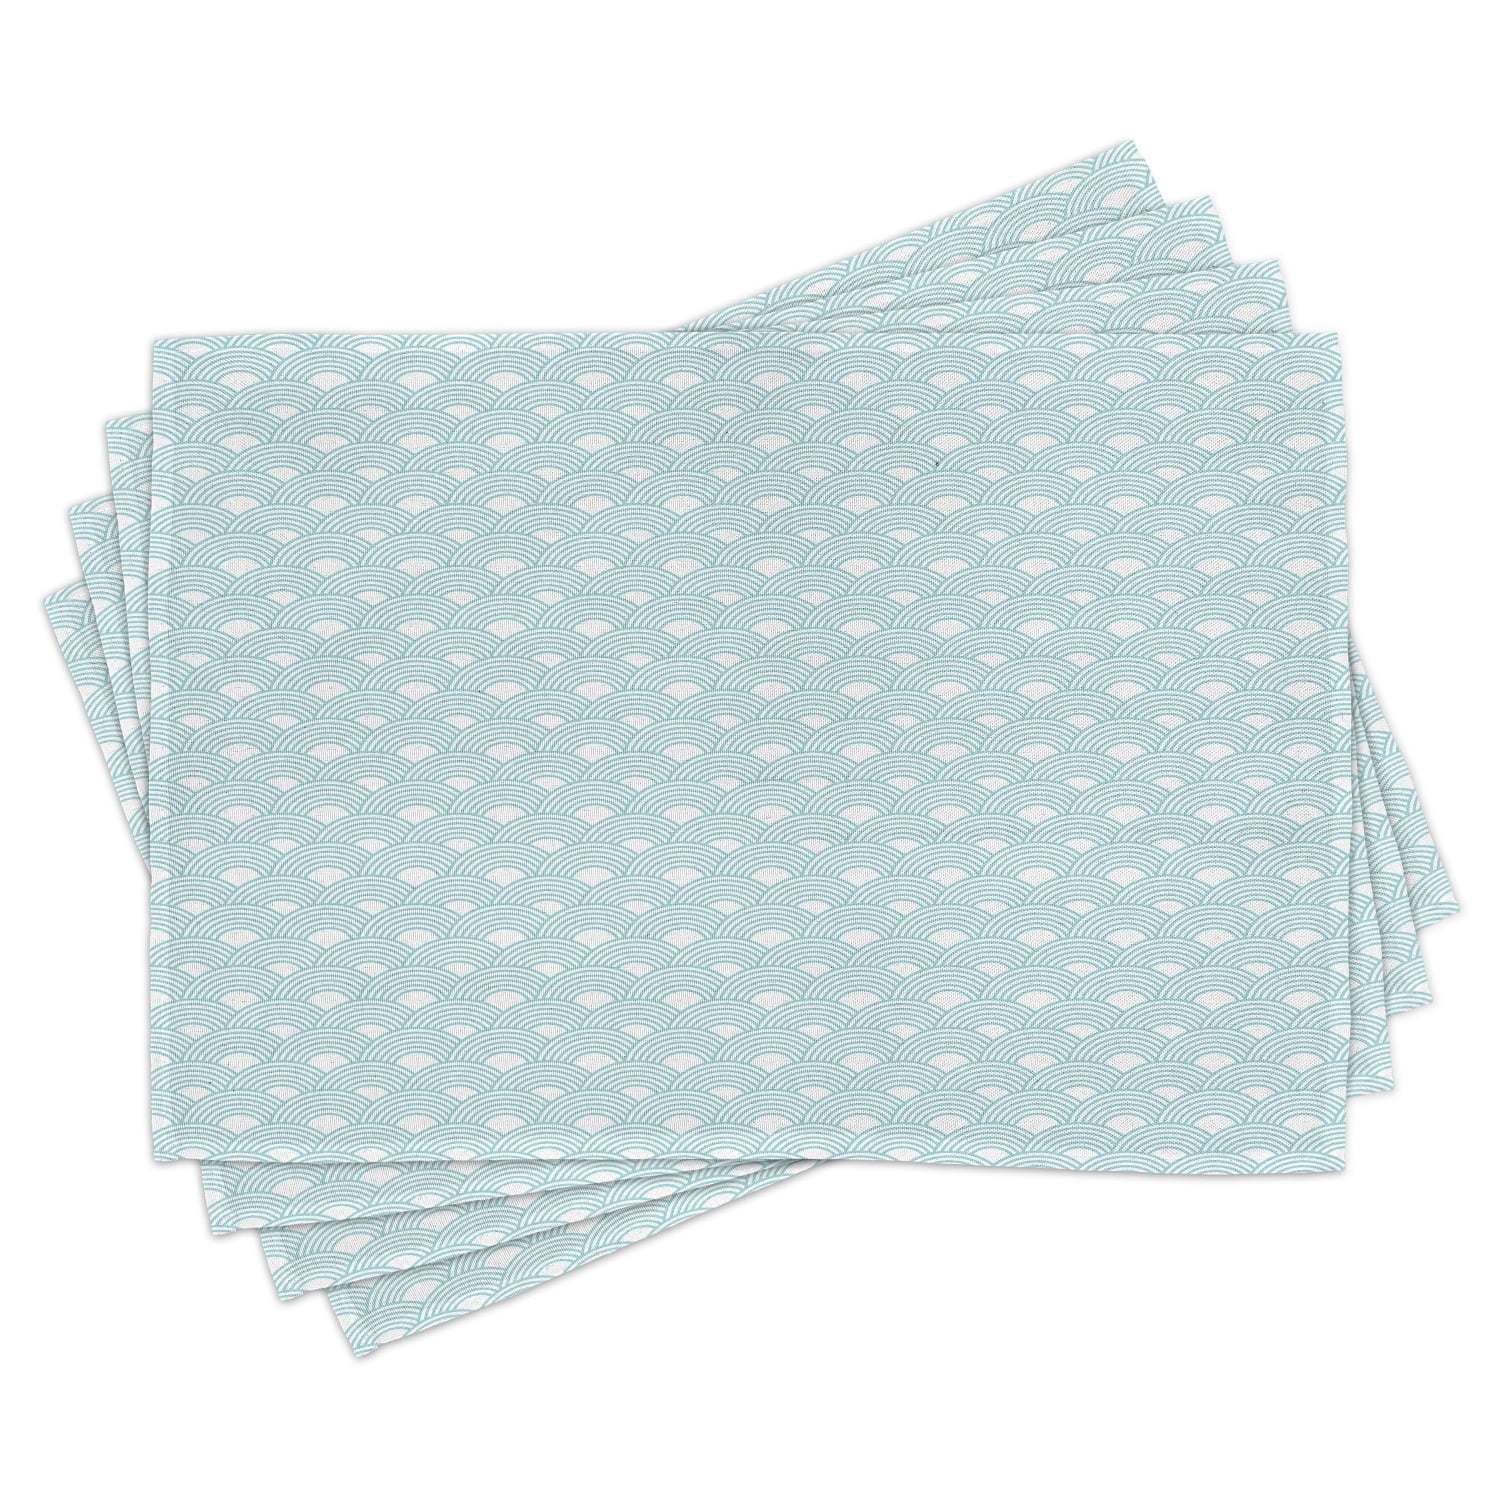 Washable Fabric Placemats for Dining Table Standard Size Ambesonne Bicycle Place Mats Set of 4 Repetitive of Bicycles on a Plain Background Sportive Activities Pale Coffee and White